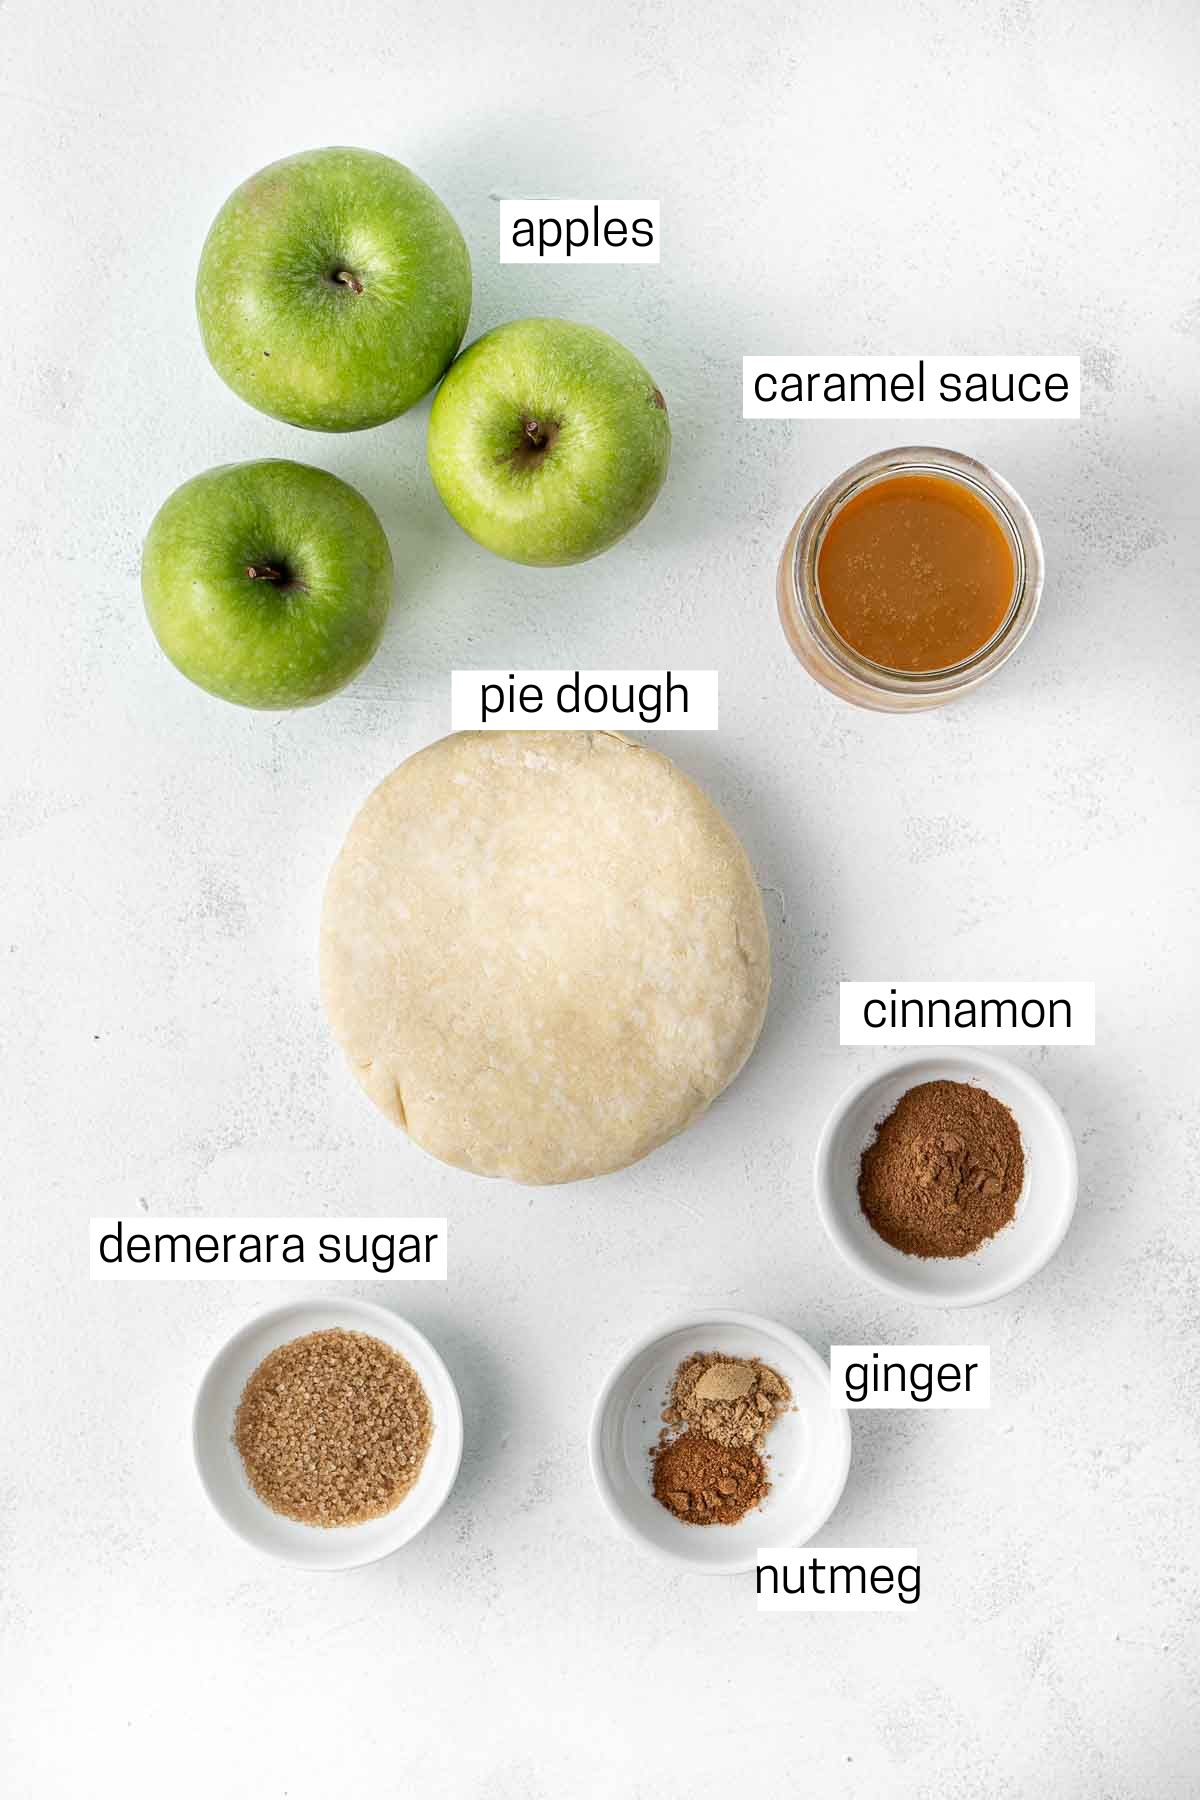 All ingredients needed to make caramel apple galette laid out in small bowls.